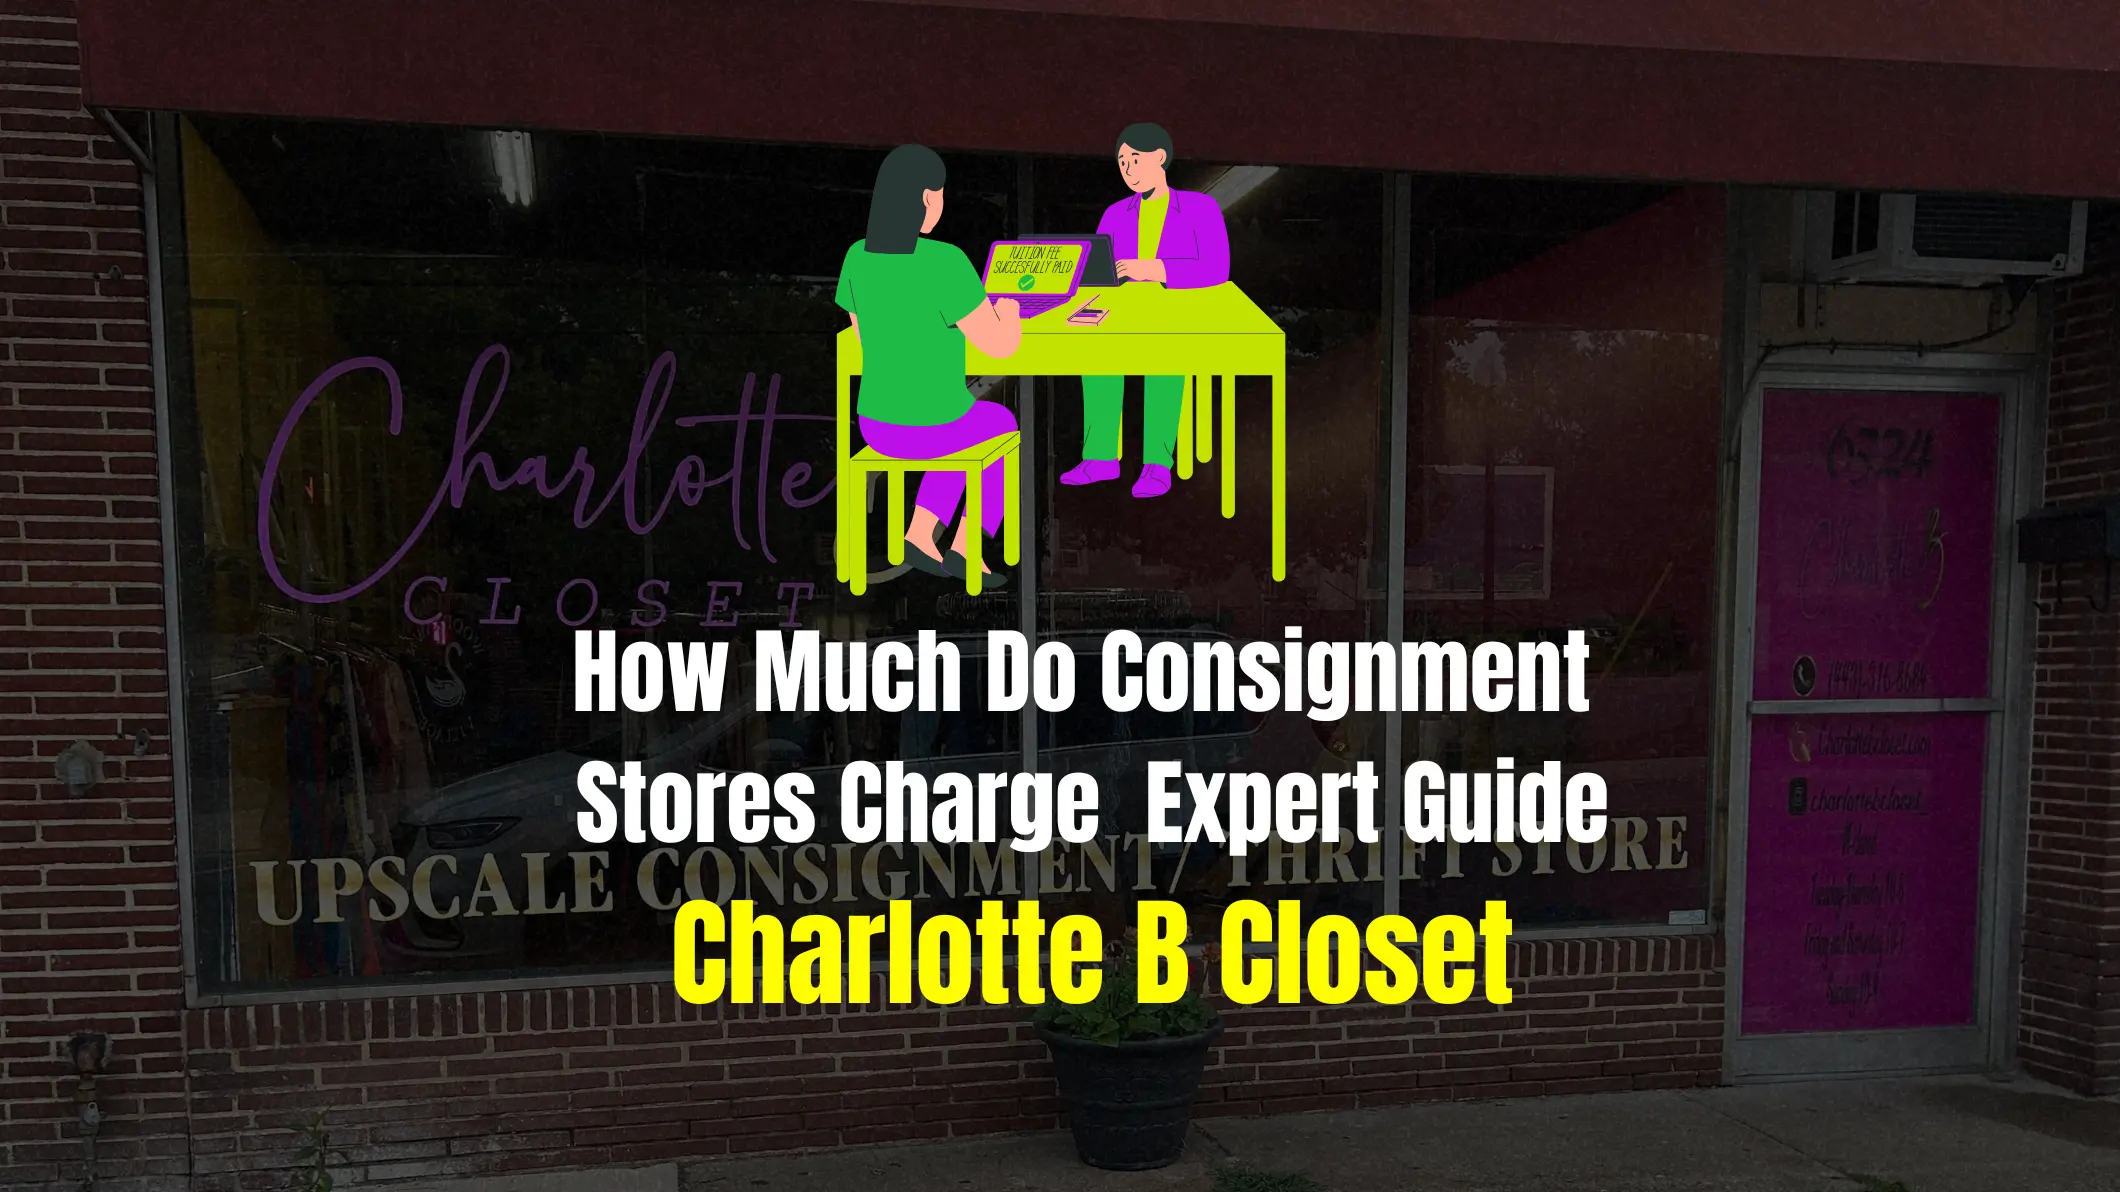 How Much Do Consignment Stores Charge - Expert Guide